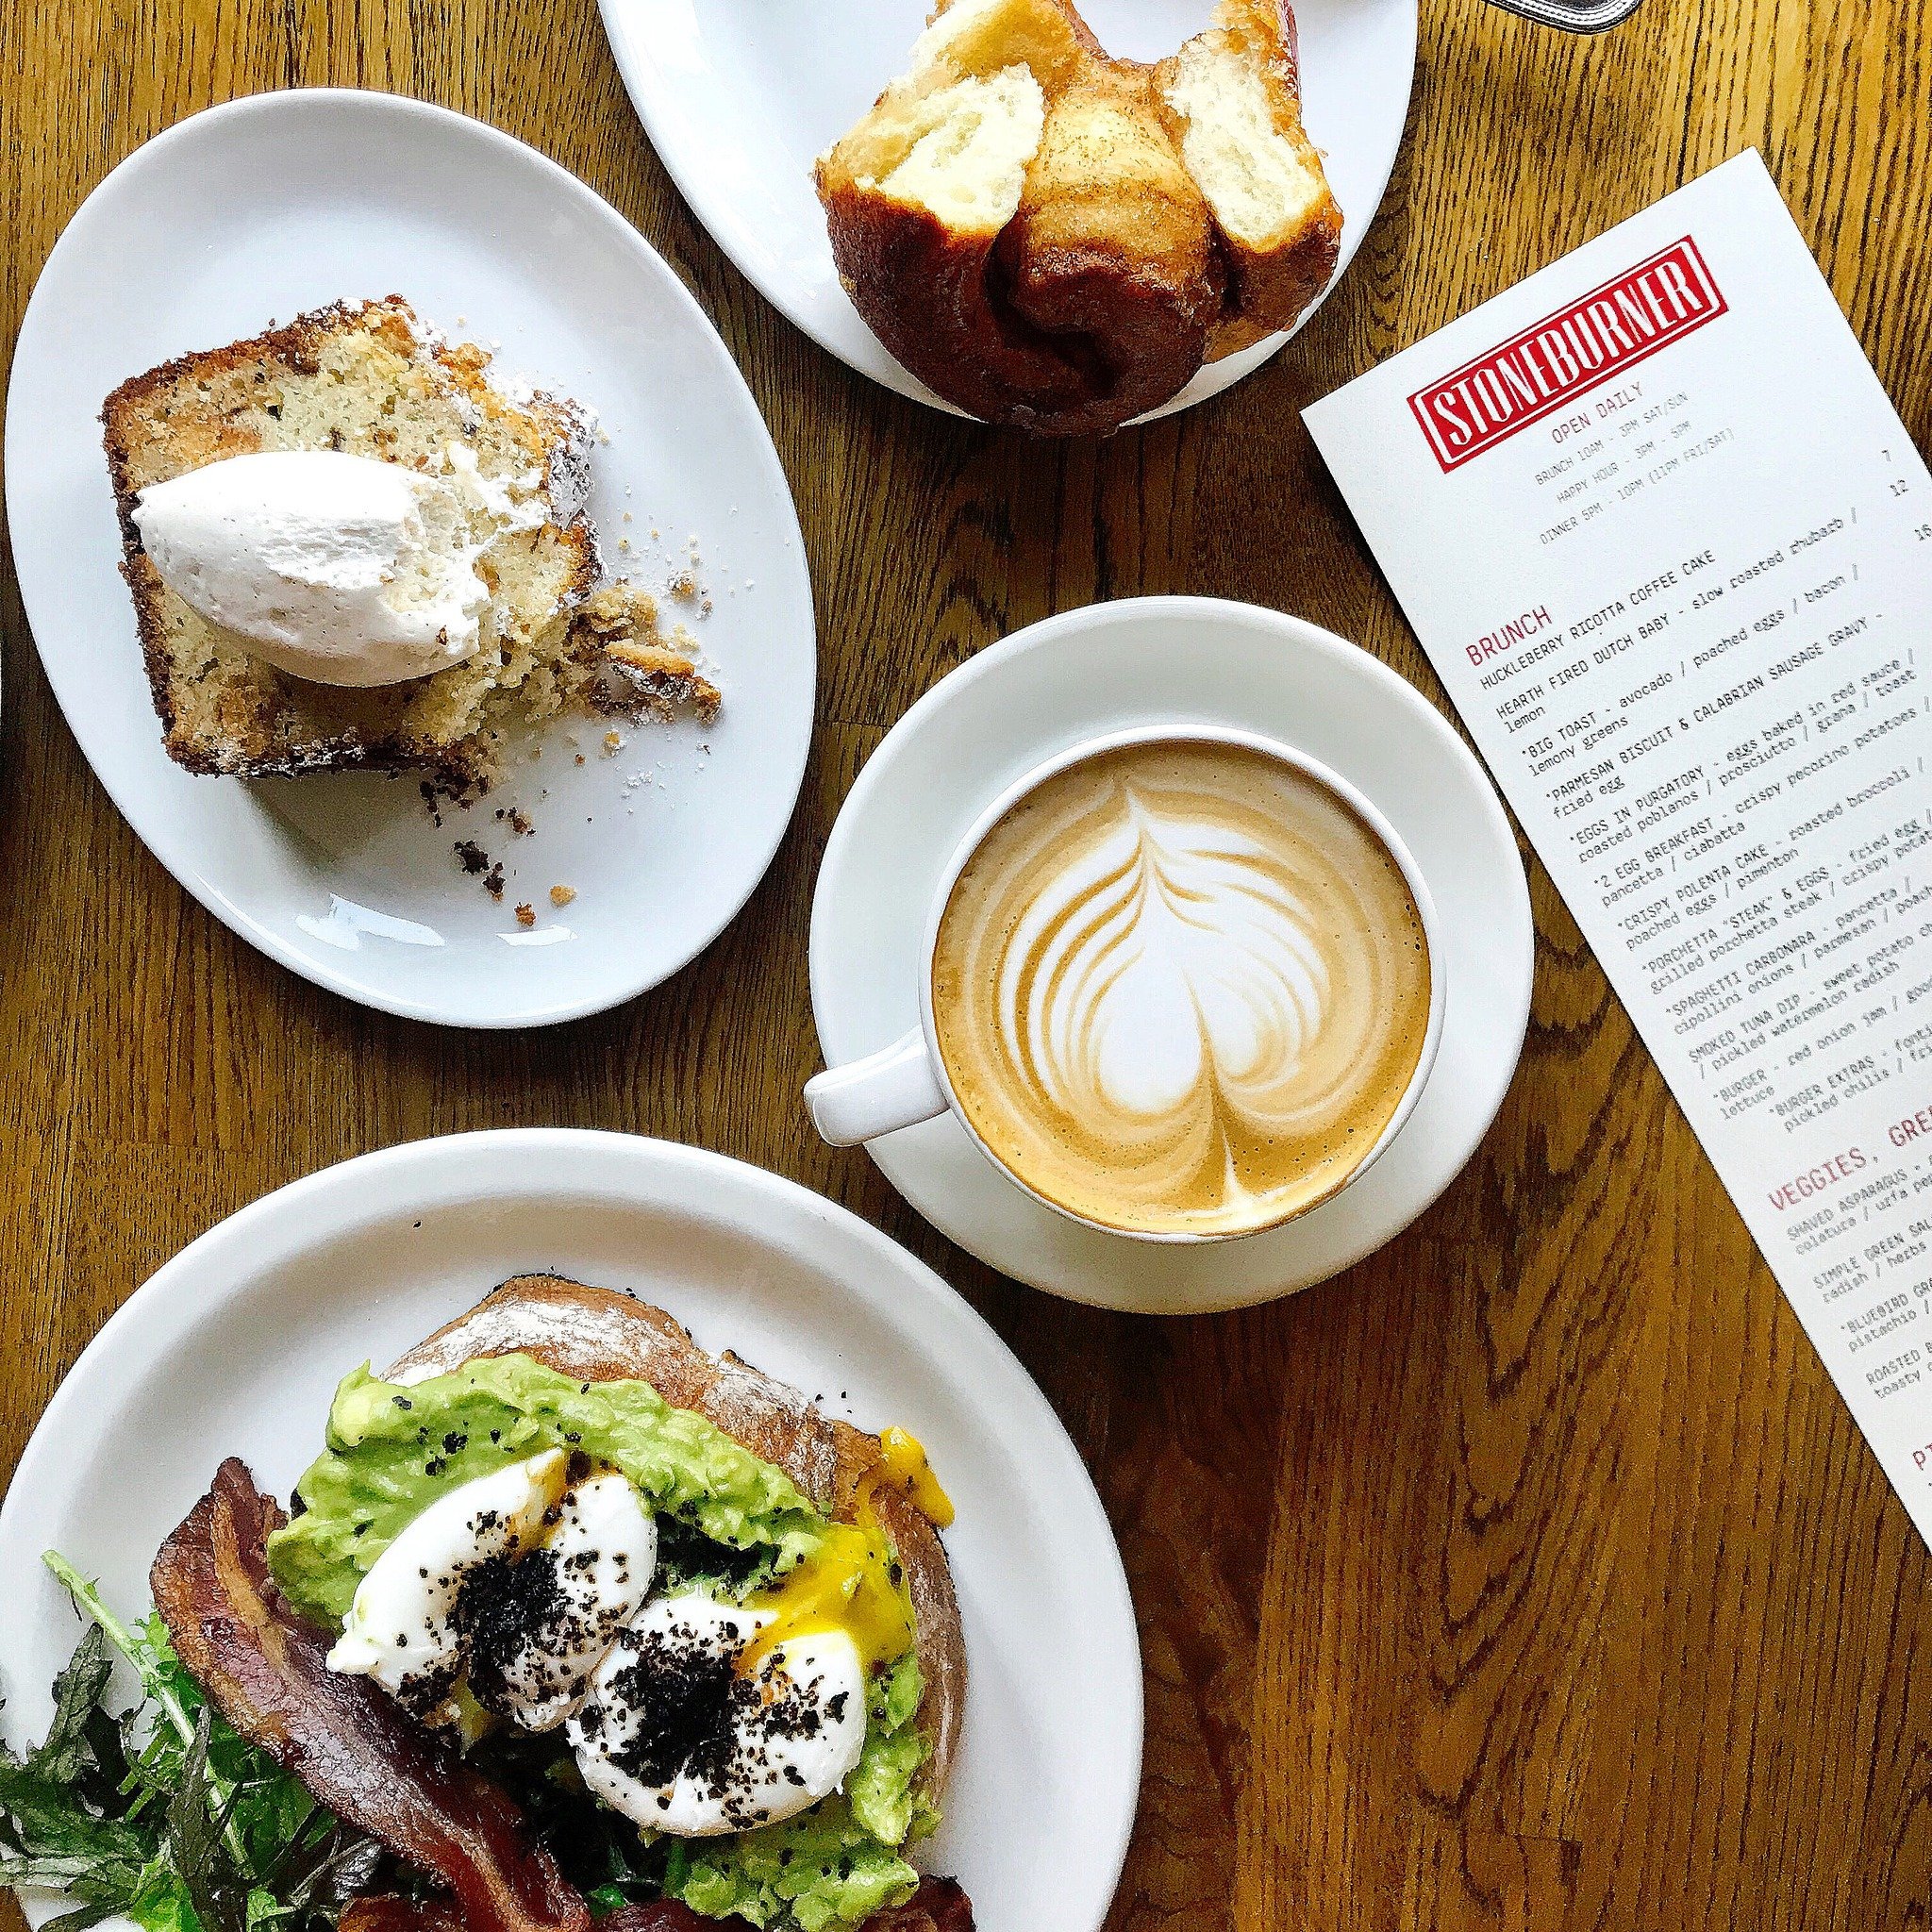 BRUNCH is alive &amp; well. Join us when you visit Ballard on Sundays for the @sfmamarkets &mdash; we are fortunate to have access to all the incredible seasonal goods from the market vendors and include so many of them on our menu. Brunch reservatio